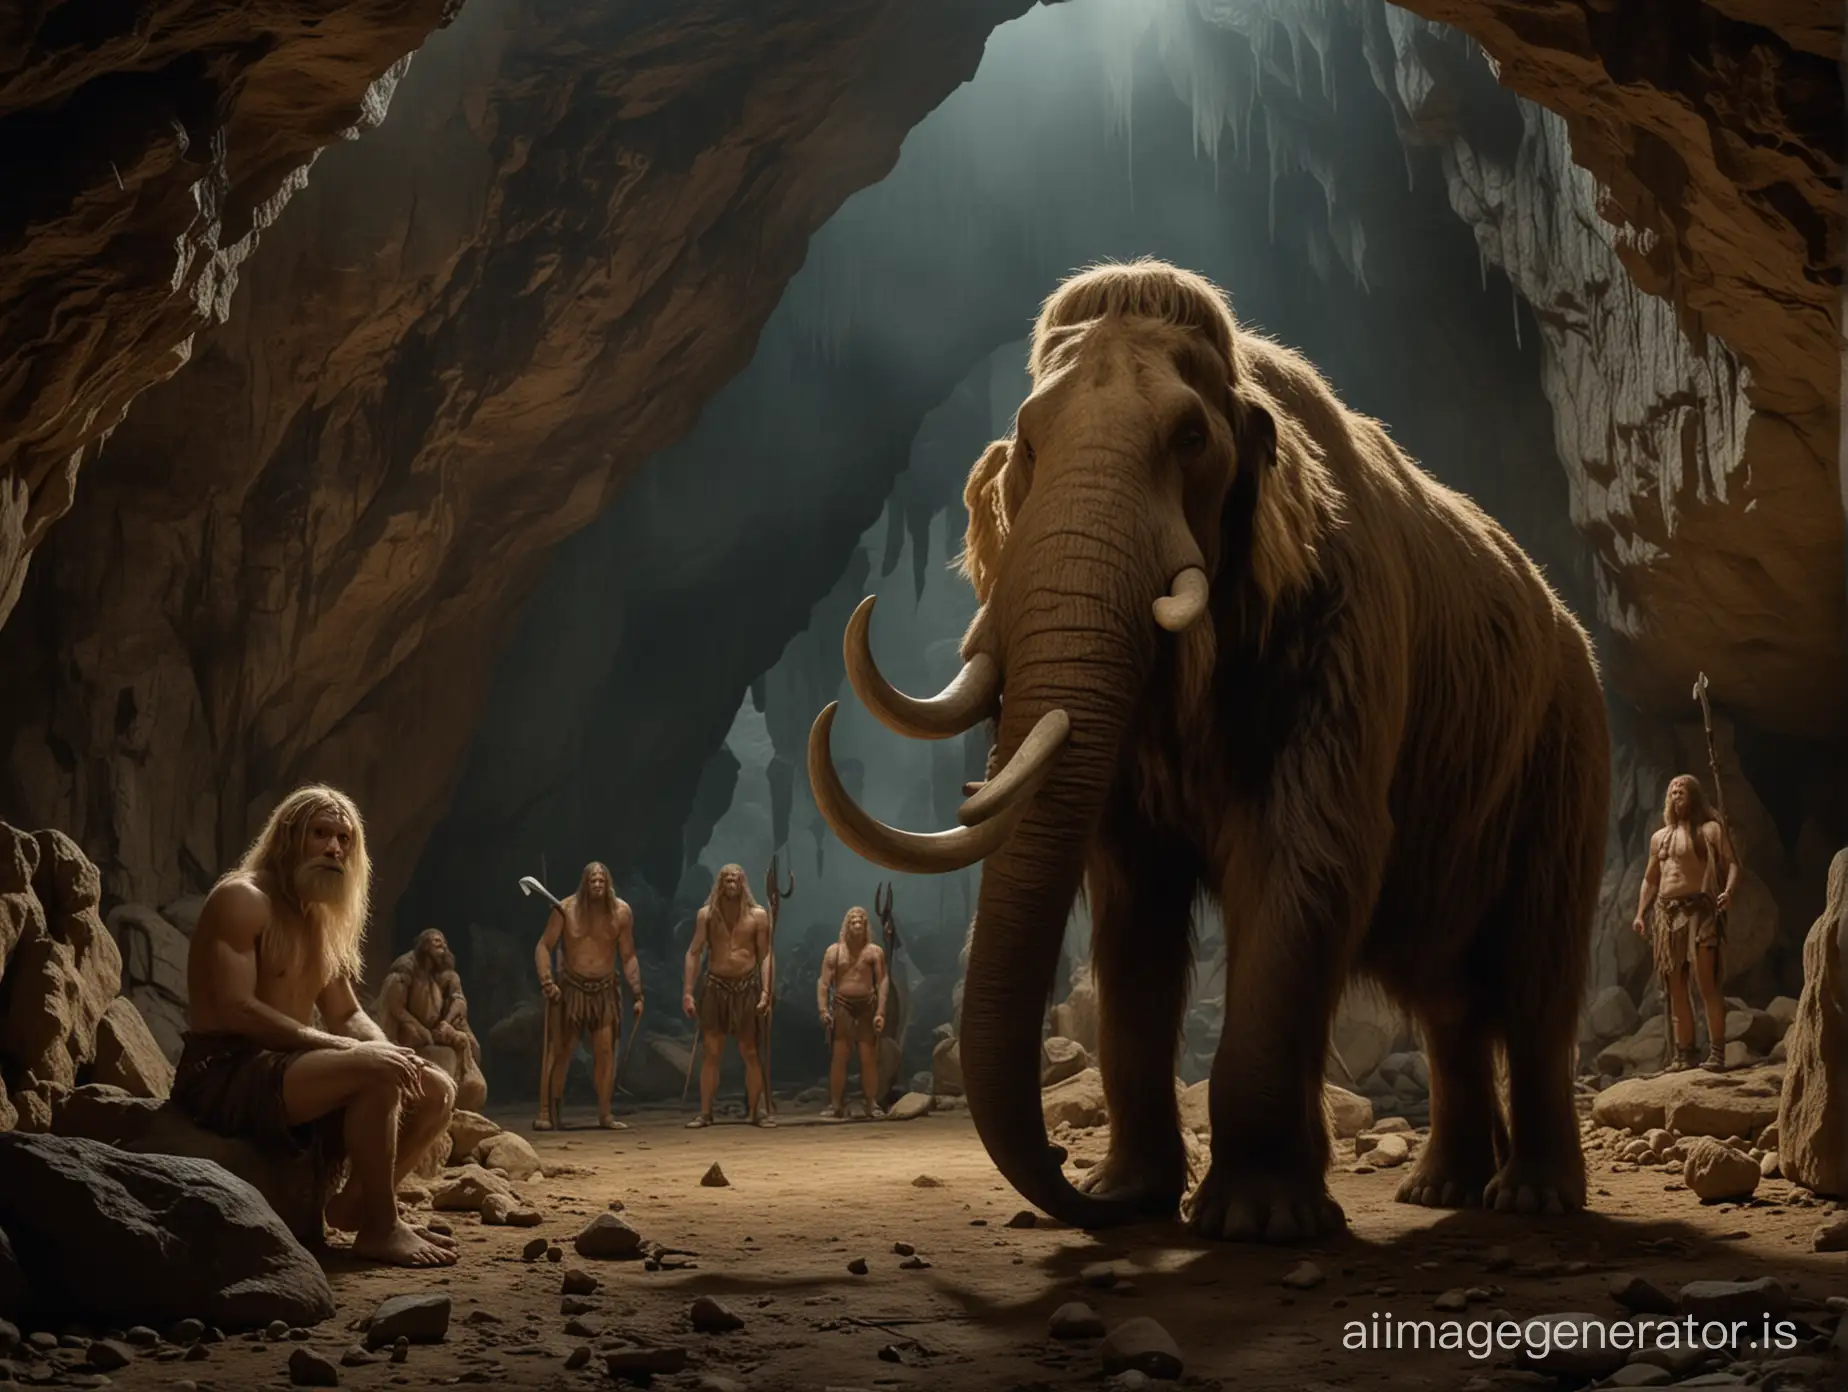 cinema scene in a cave, a tall and blond human in the foreground looks at the camera, far away in the background outside, outside a hairy mammoth surrounded by two Neanderthal warriors armed with large clubs::5 moonlight::3 